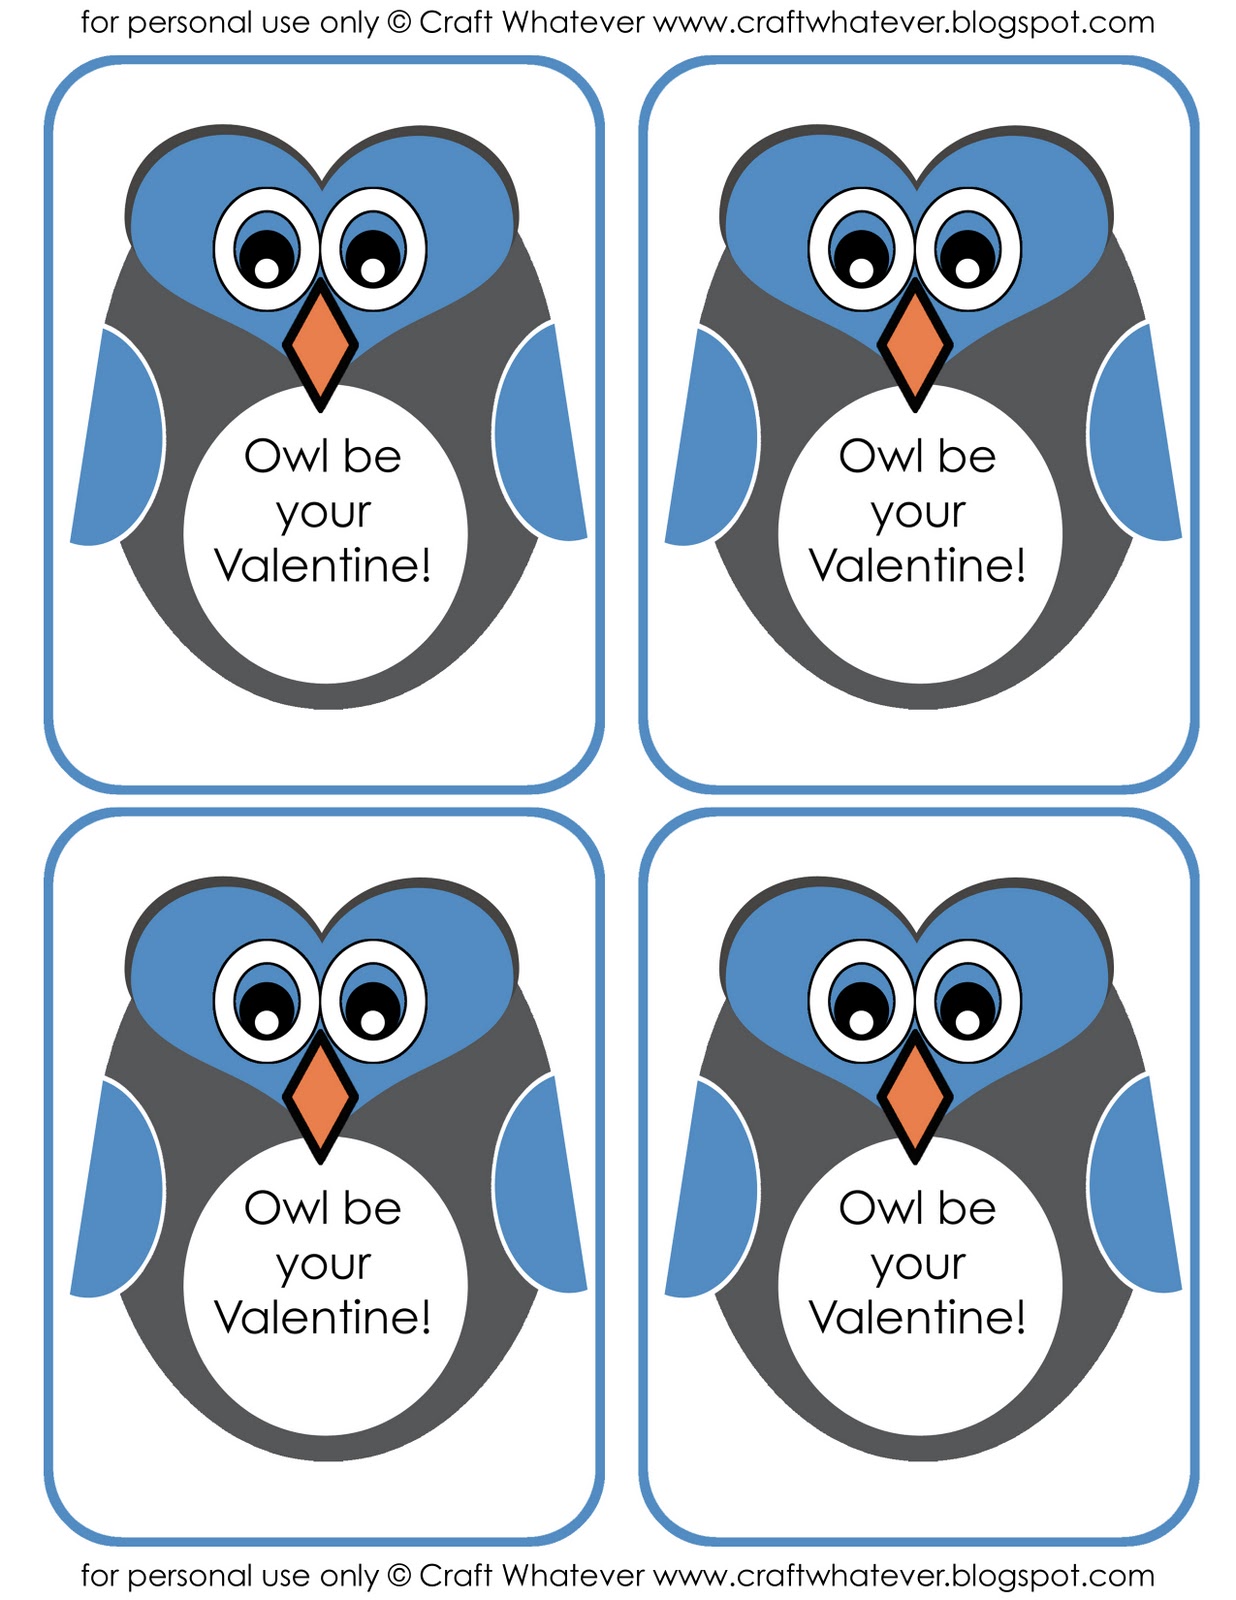 craft-whatever-free-valentine-s-day-printables